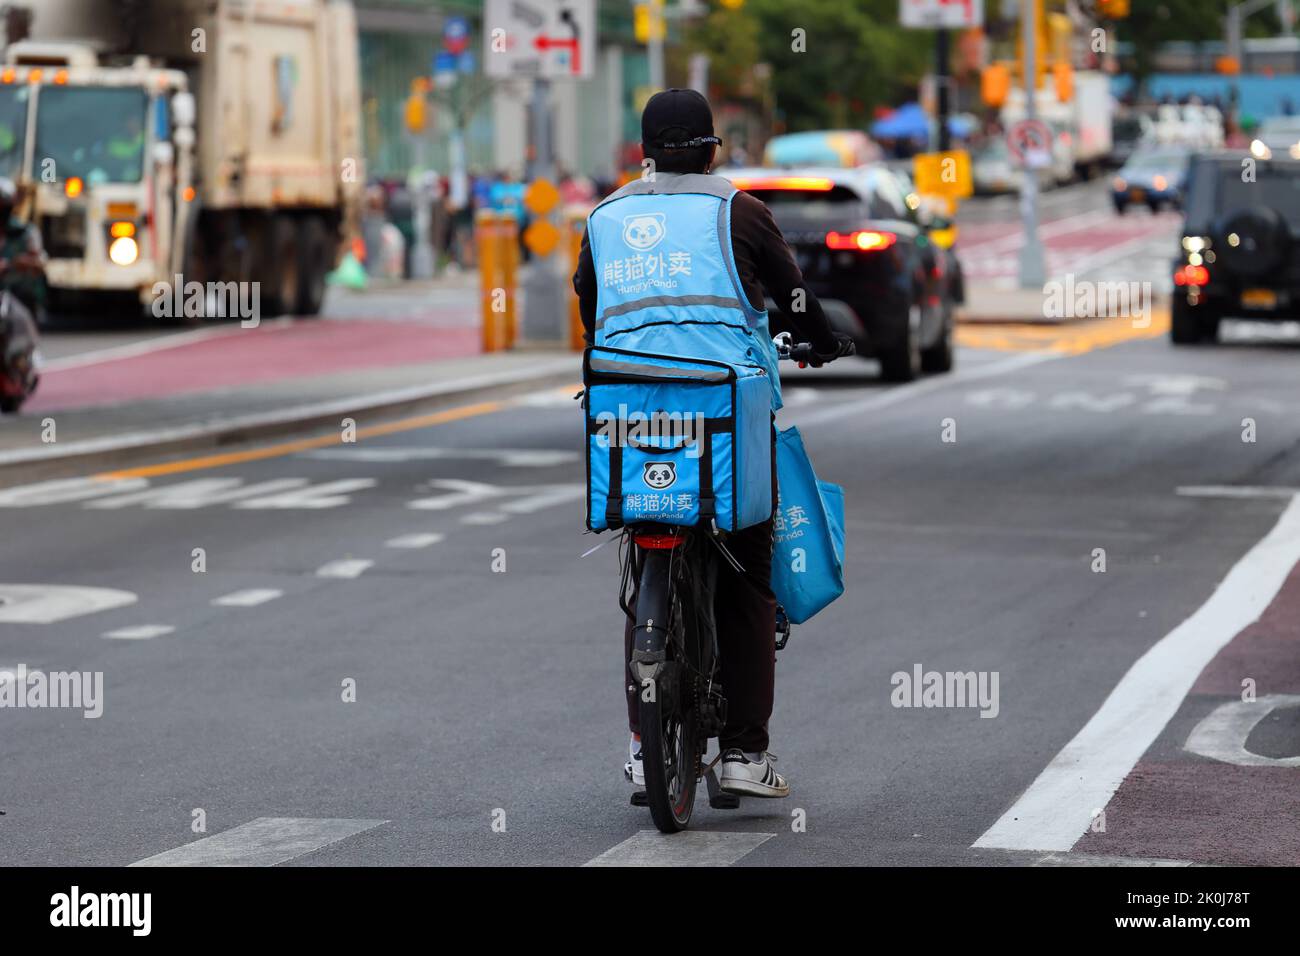 A HungryPanda food delivery person on an e bike in Downtown Flushing, New York. Hungry Panda 熊貓外賣 Asian food delivery. Stock Photo